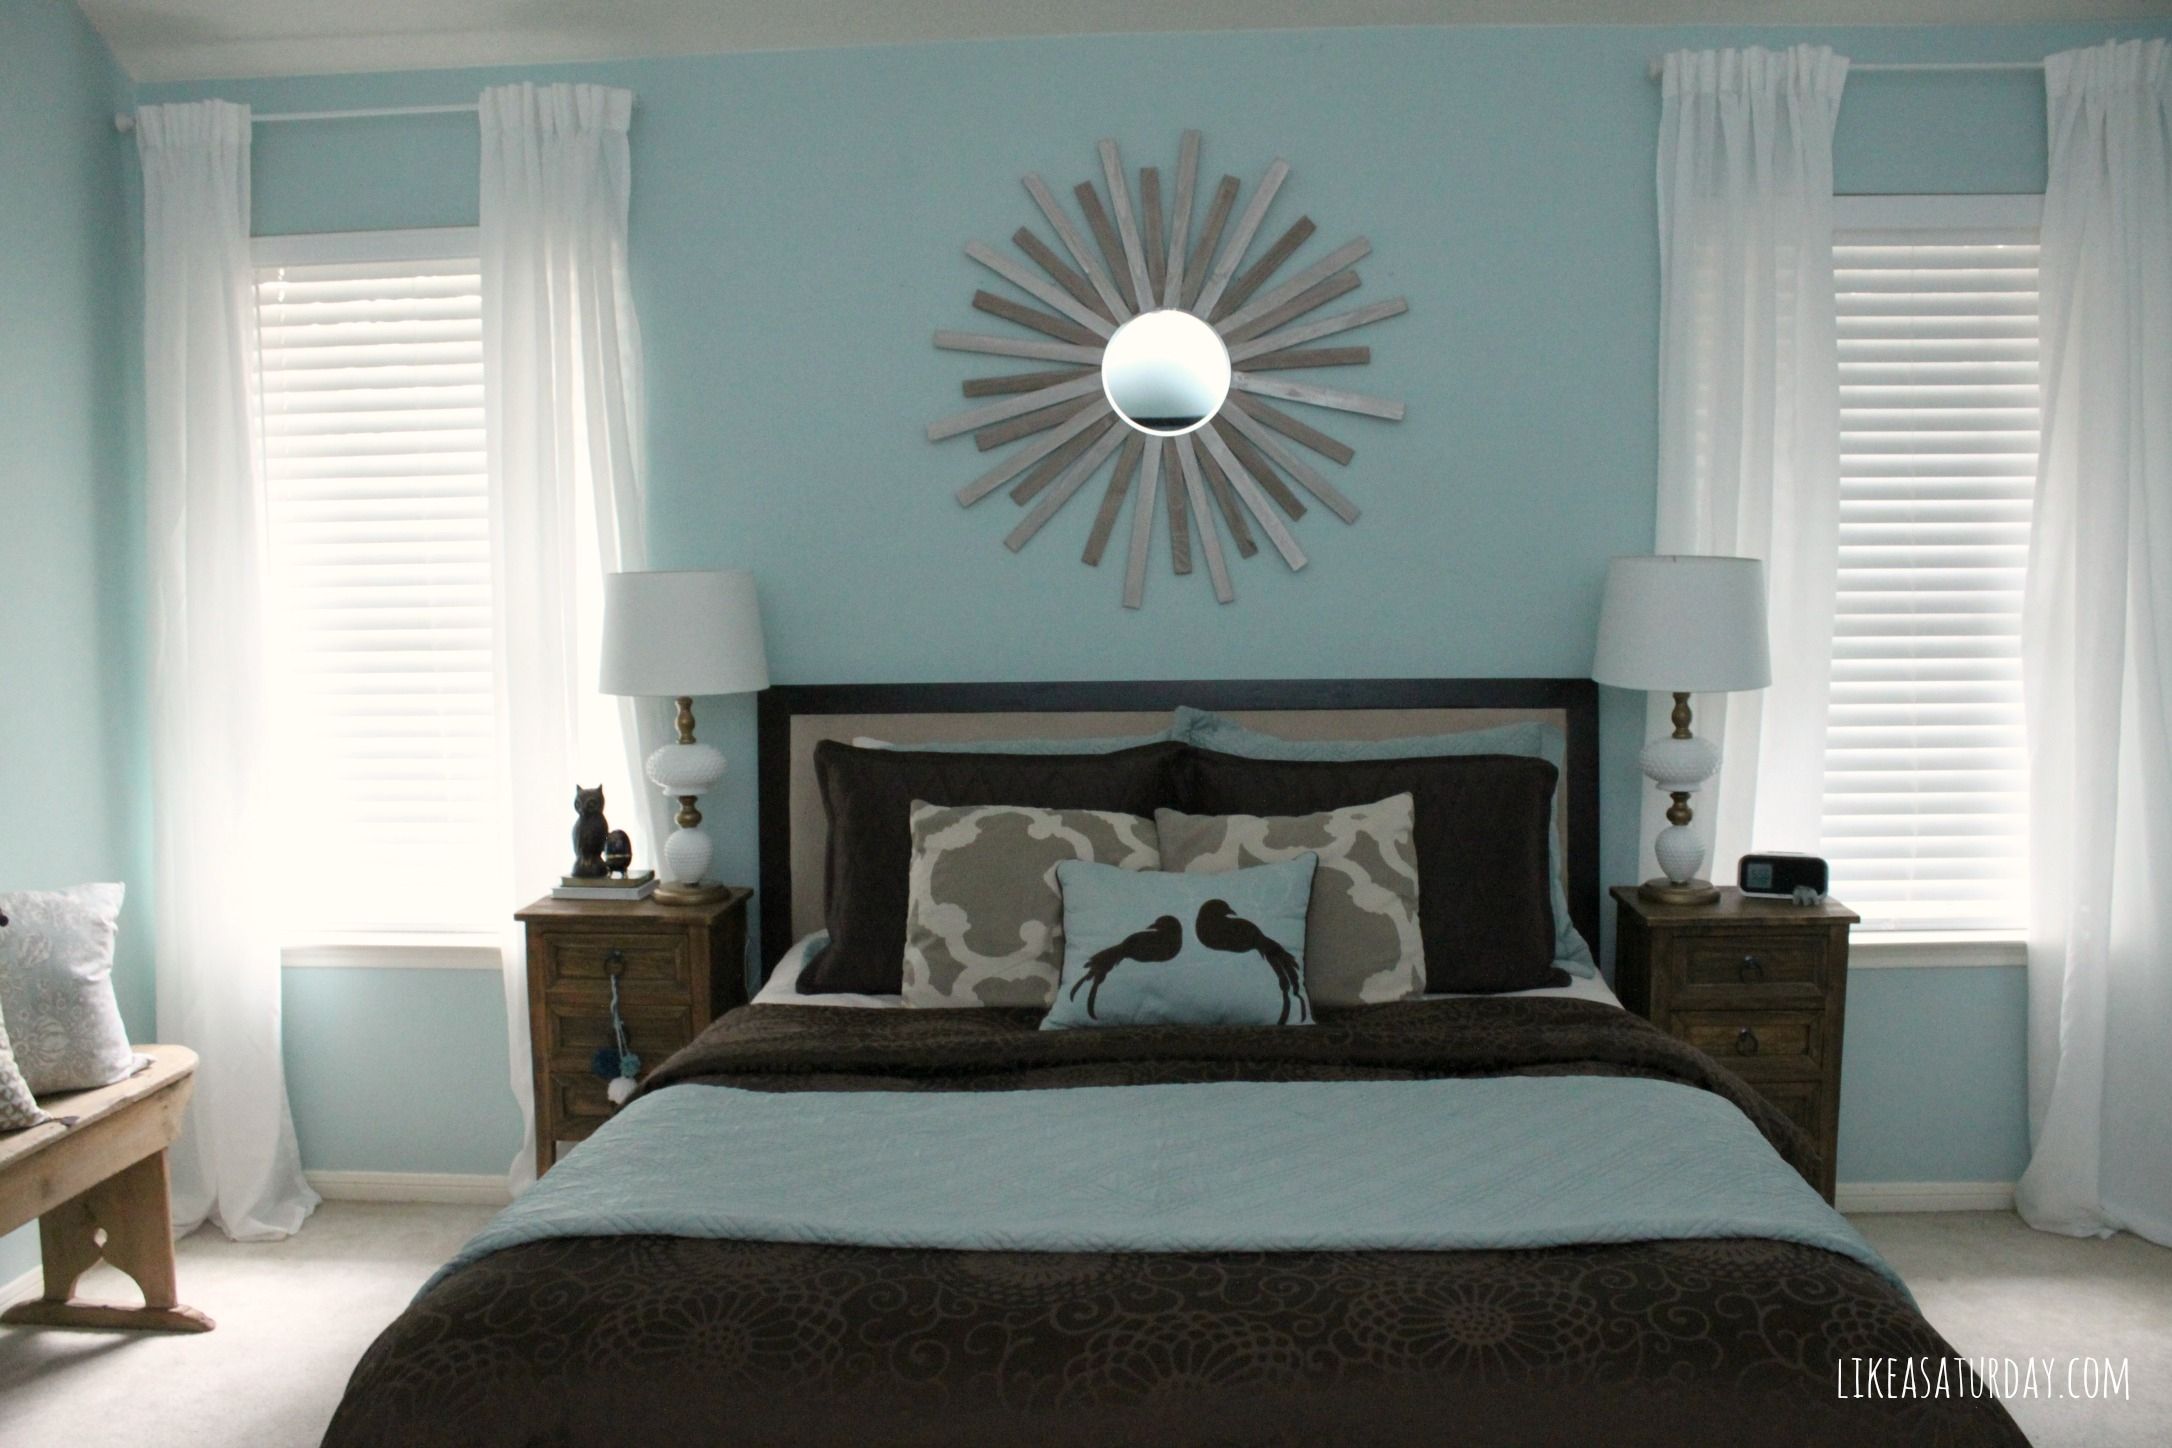 Curtains Curtains For Blue Walls Decor Master Bedroom Decorating Pertaining To Blue Curtains For Bedroom (View 24 of 25)